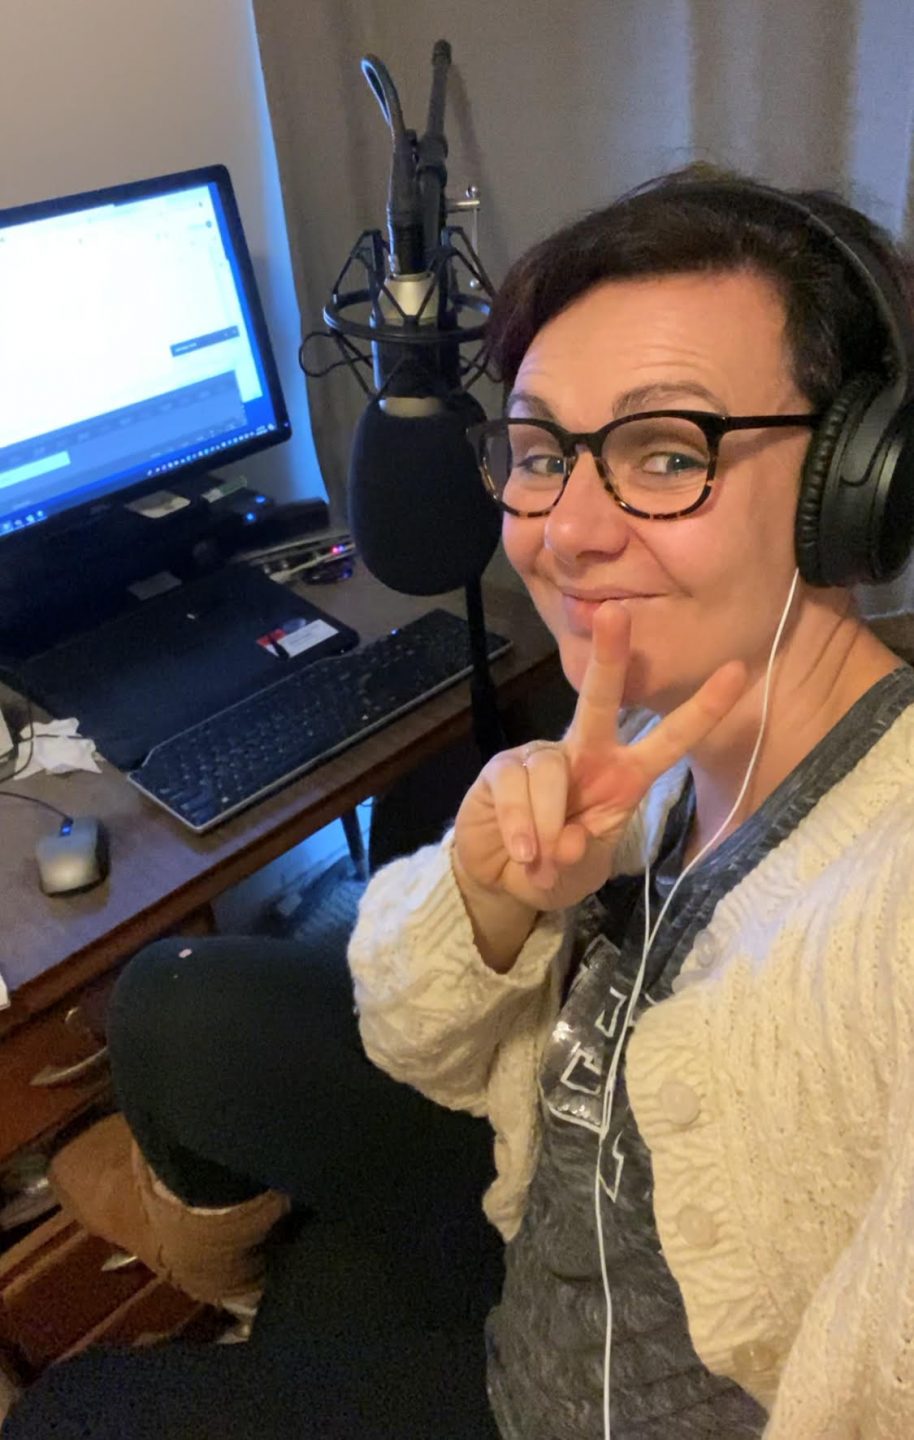 Tegan Taylor smiling showing a peace sign in front of a computer and microphone